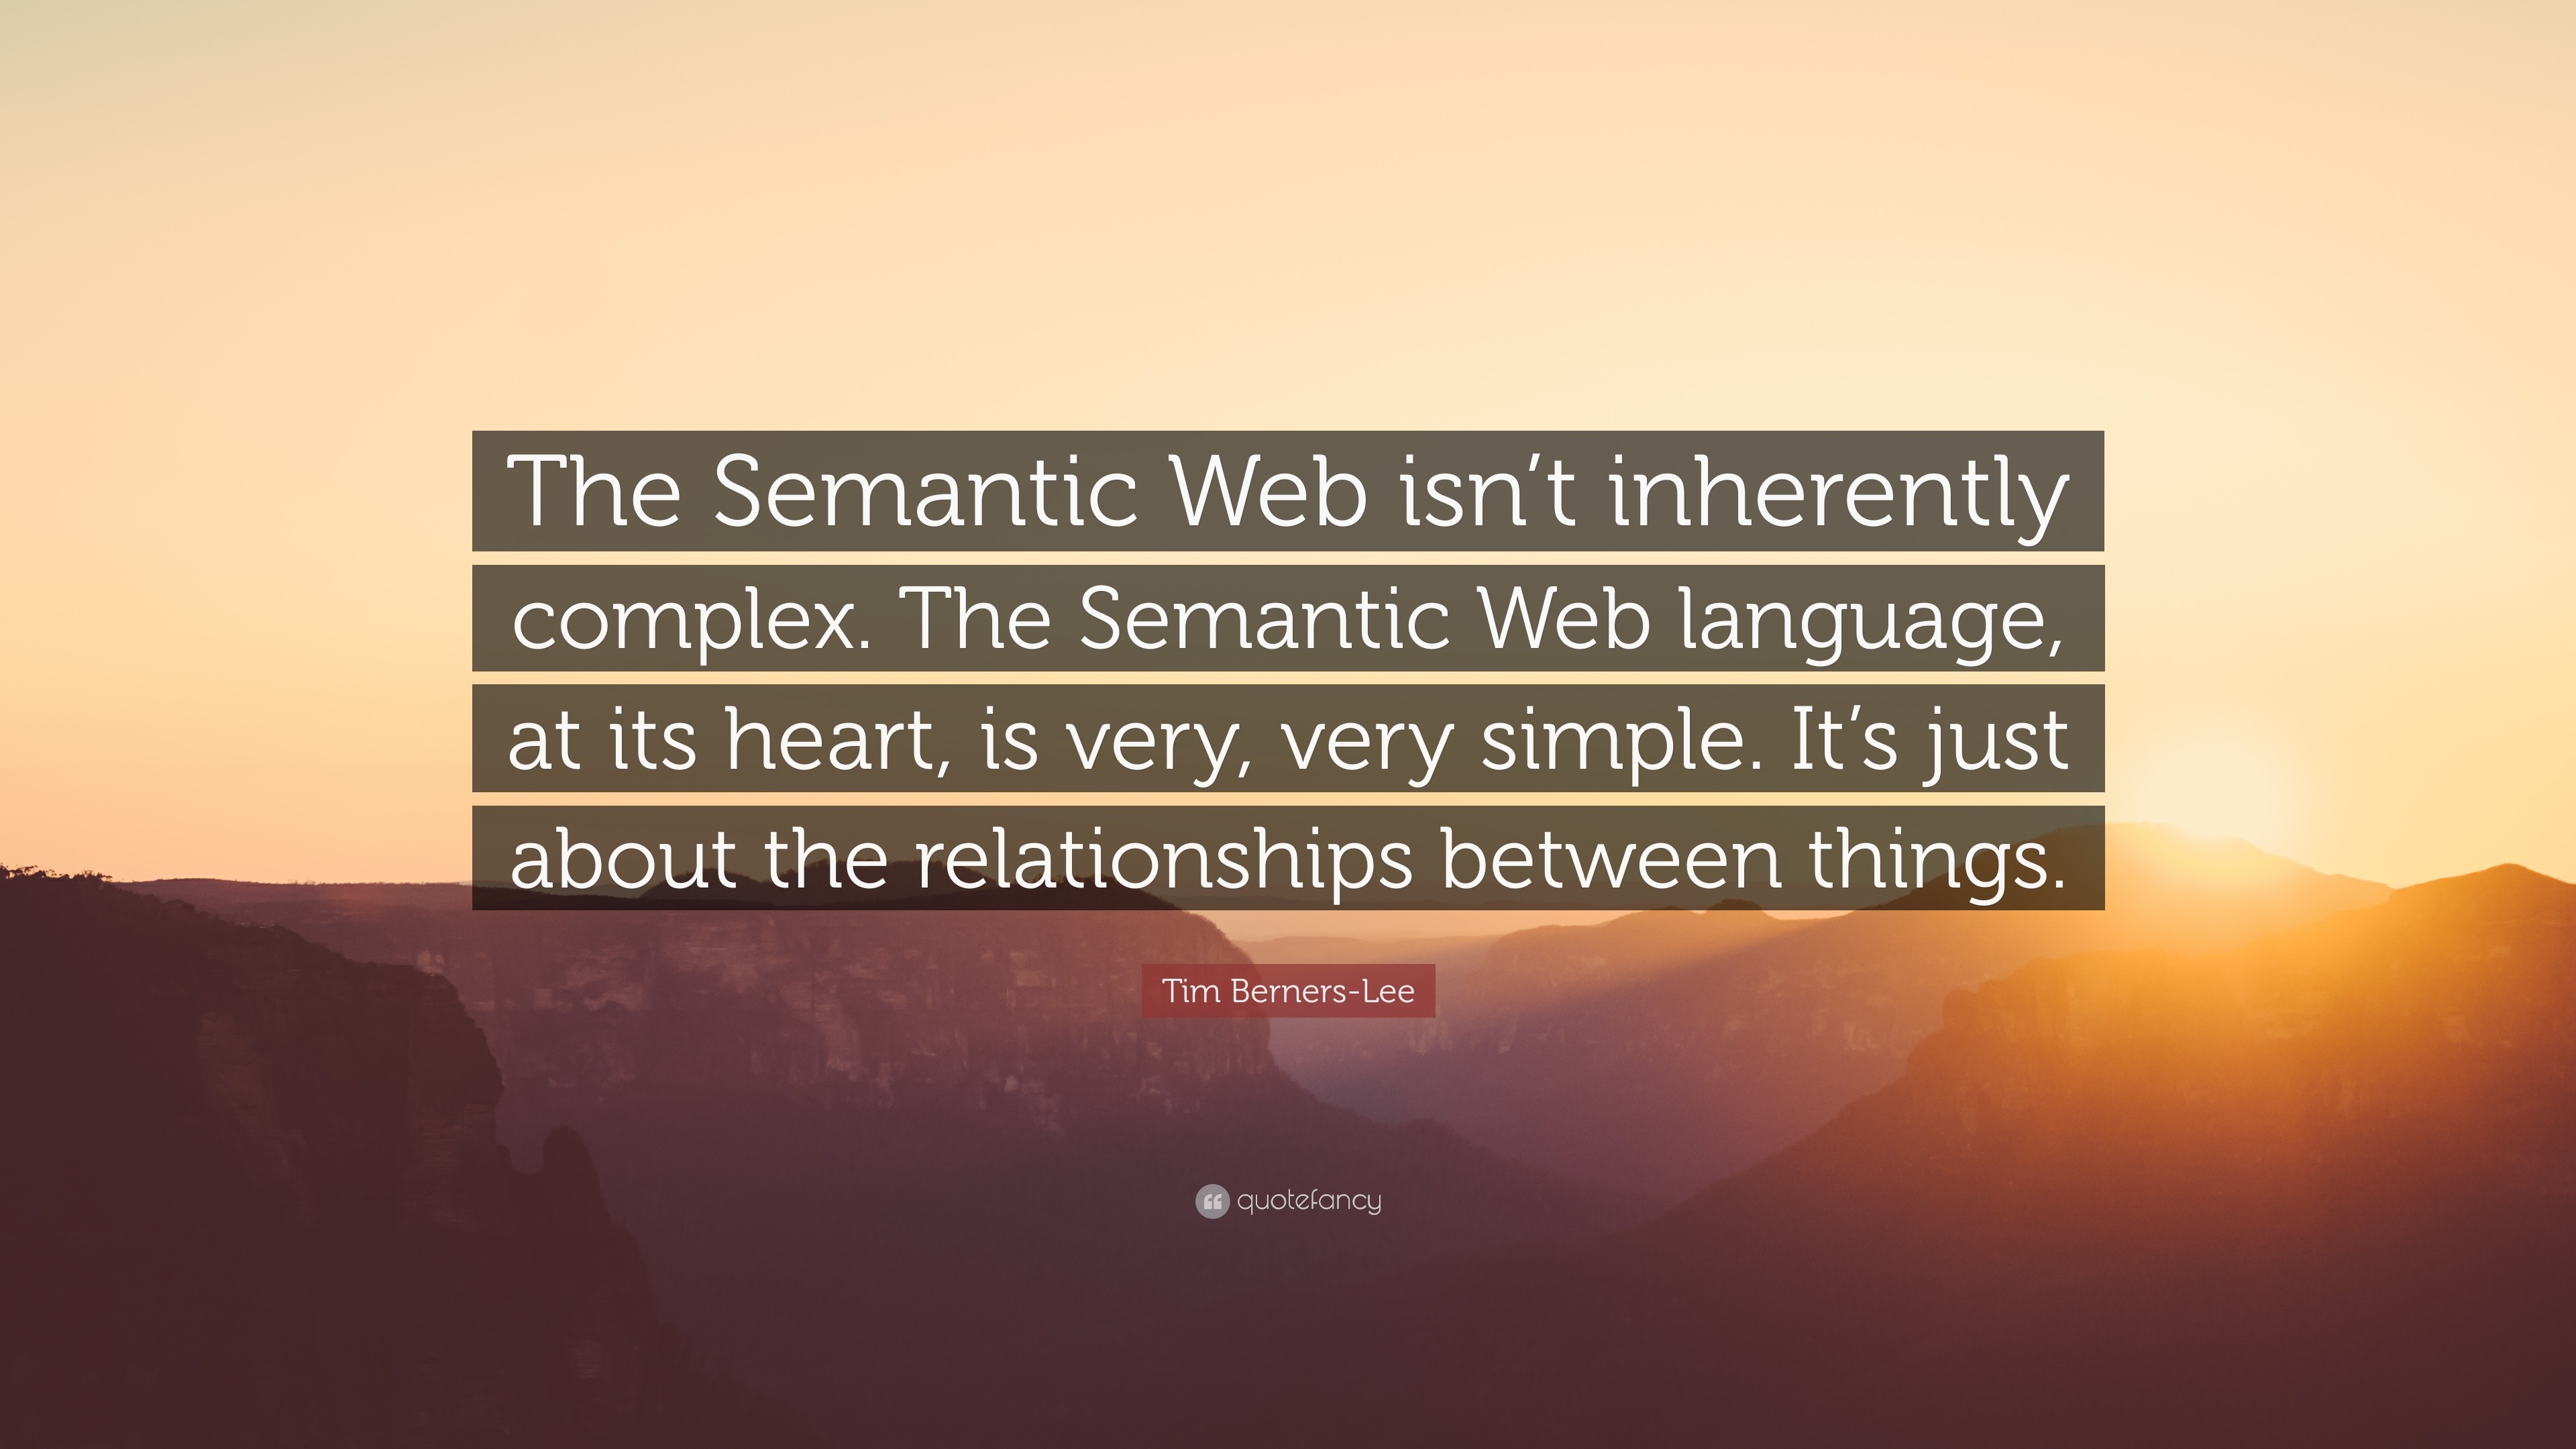 Skæbne Jeg vil have forudsigelse Tim Berners-Lee Quote: “The Semantic Web isn't inherently complex. The Semantic  Web language, at its heart, is very, very simple. It's just abou...”